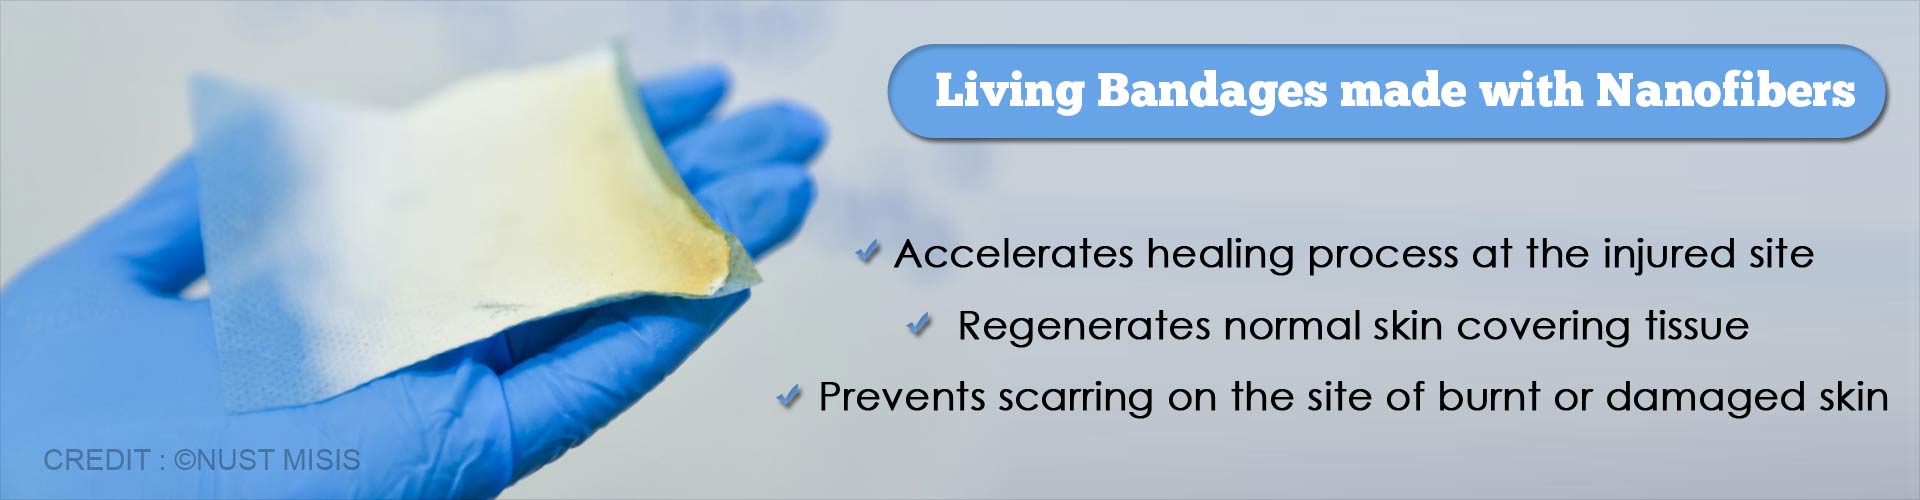 living bandages made with nanofibers
- accelerates healing process at the injured site
- regenerates normal skin covering tissue
- prevents scarring on the site of burnt or damaged skin